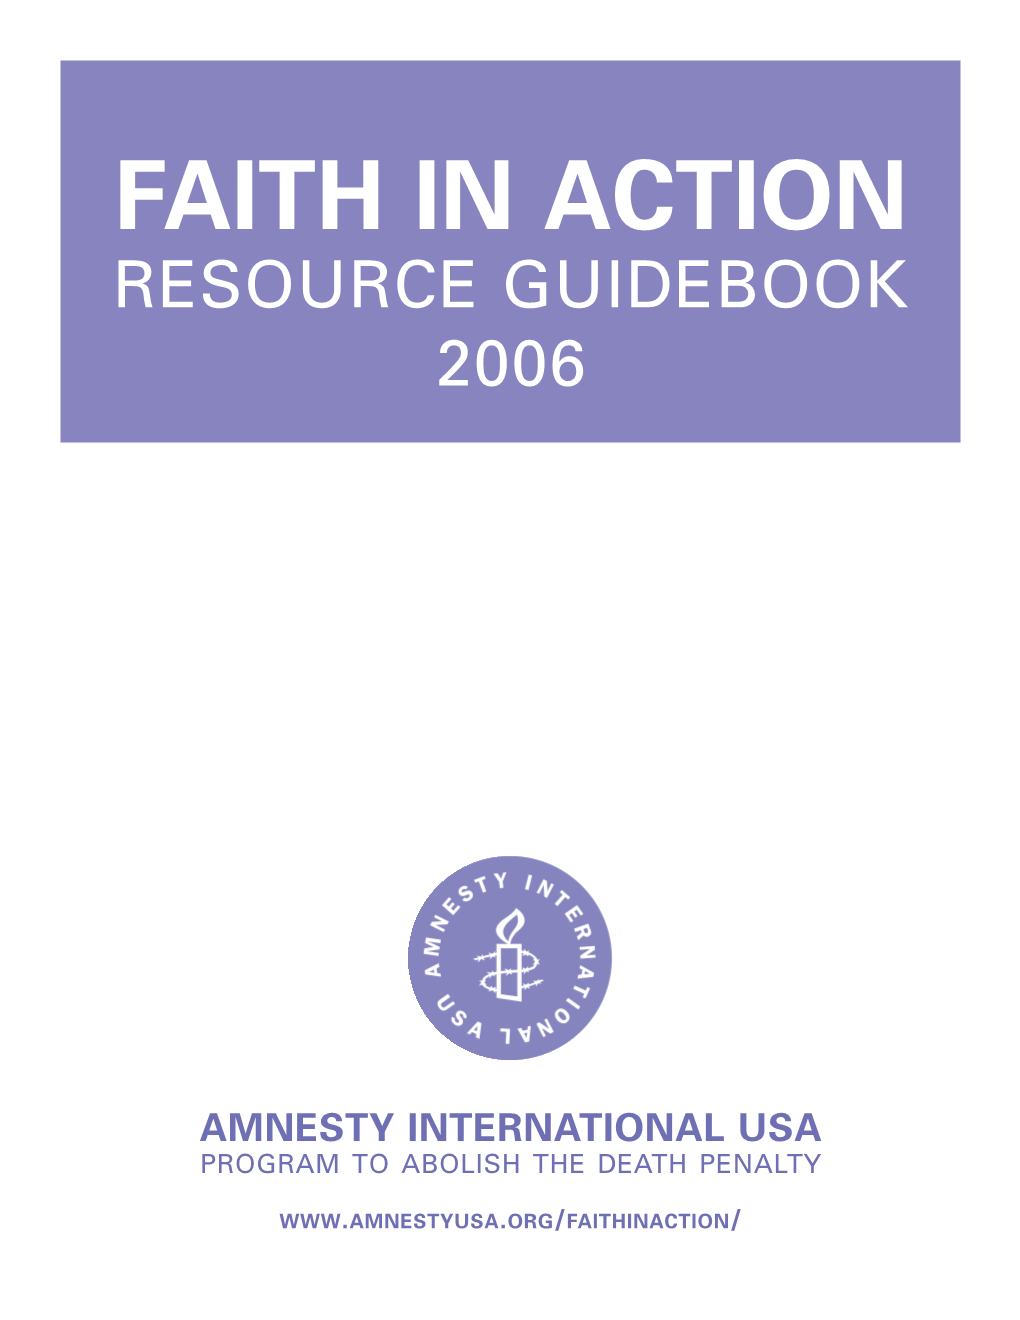 Faith in Action Resource Guidebook 2006